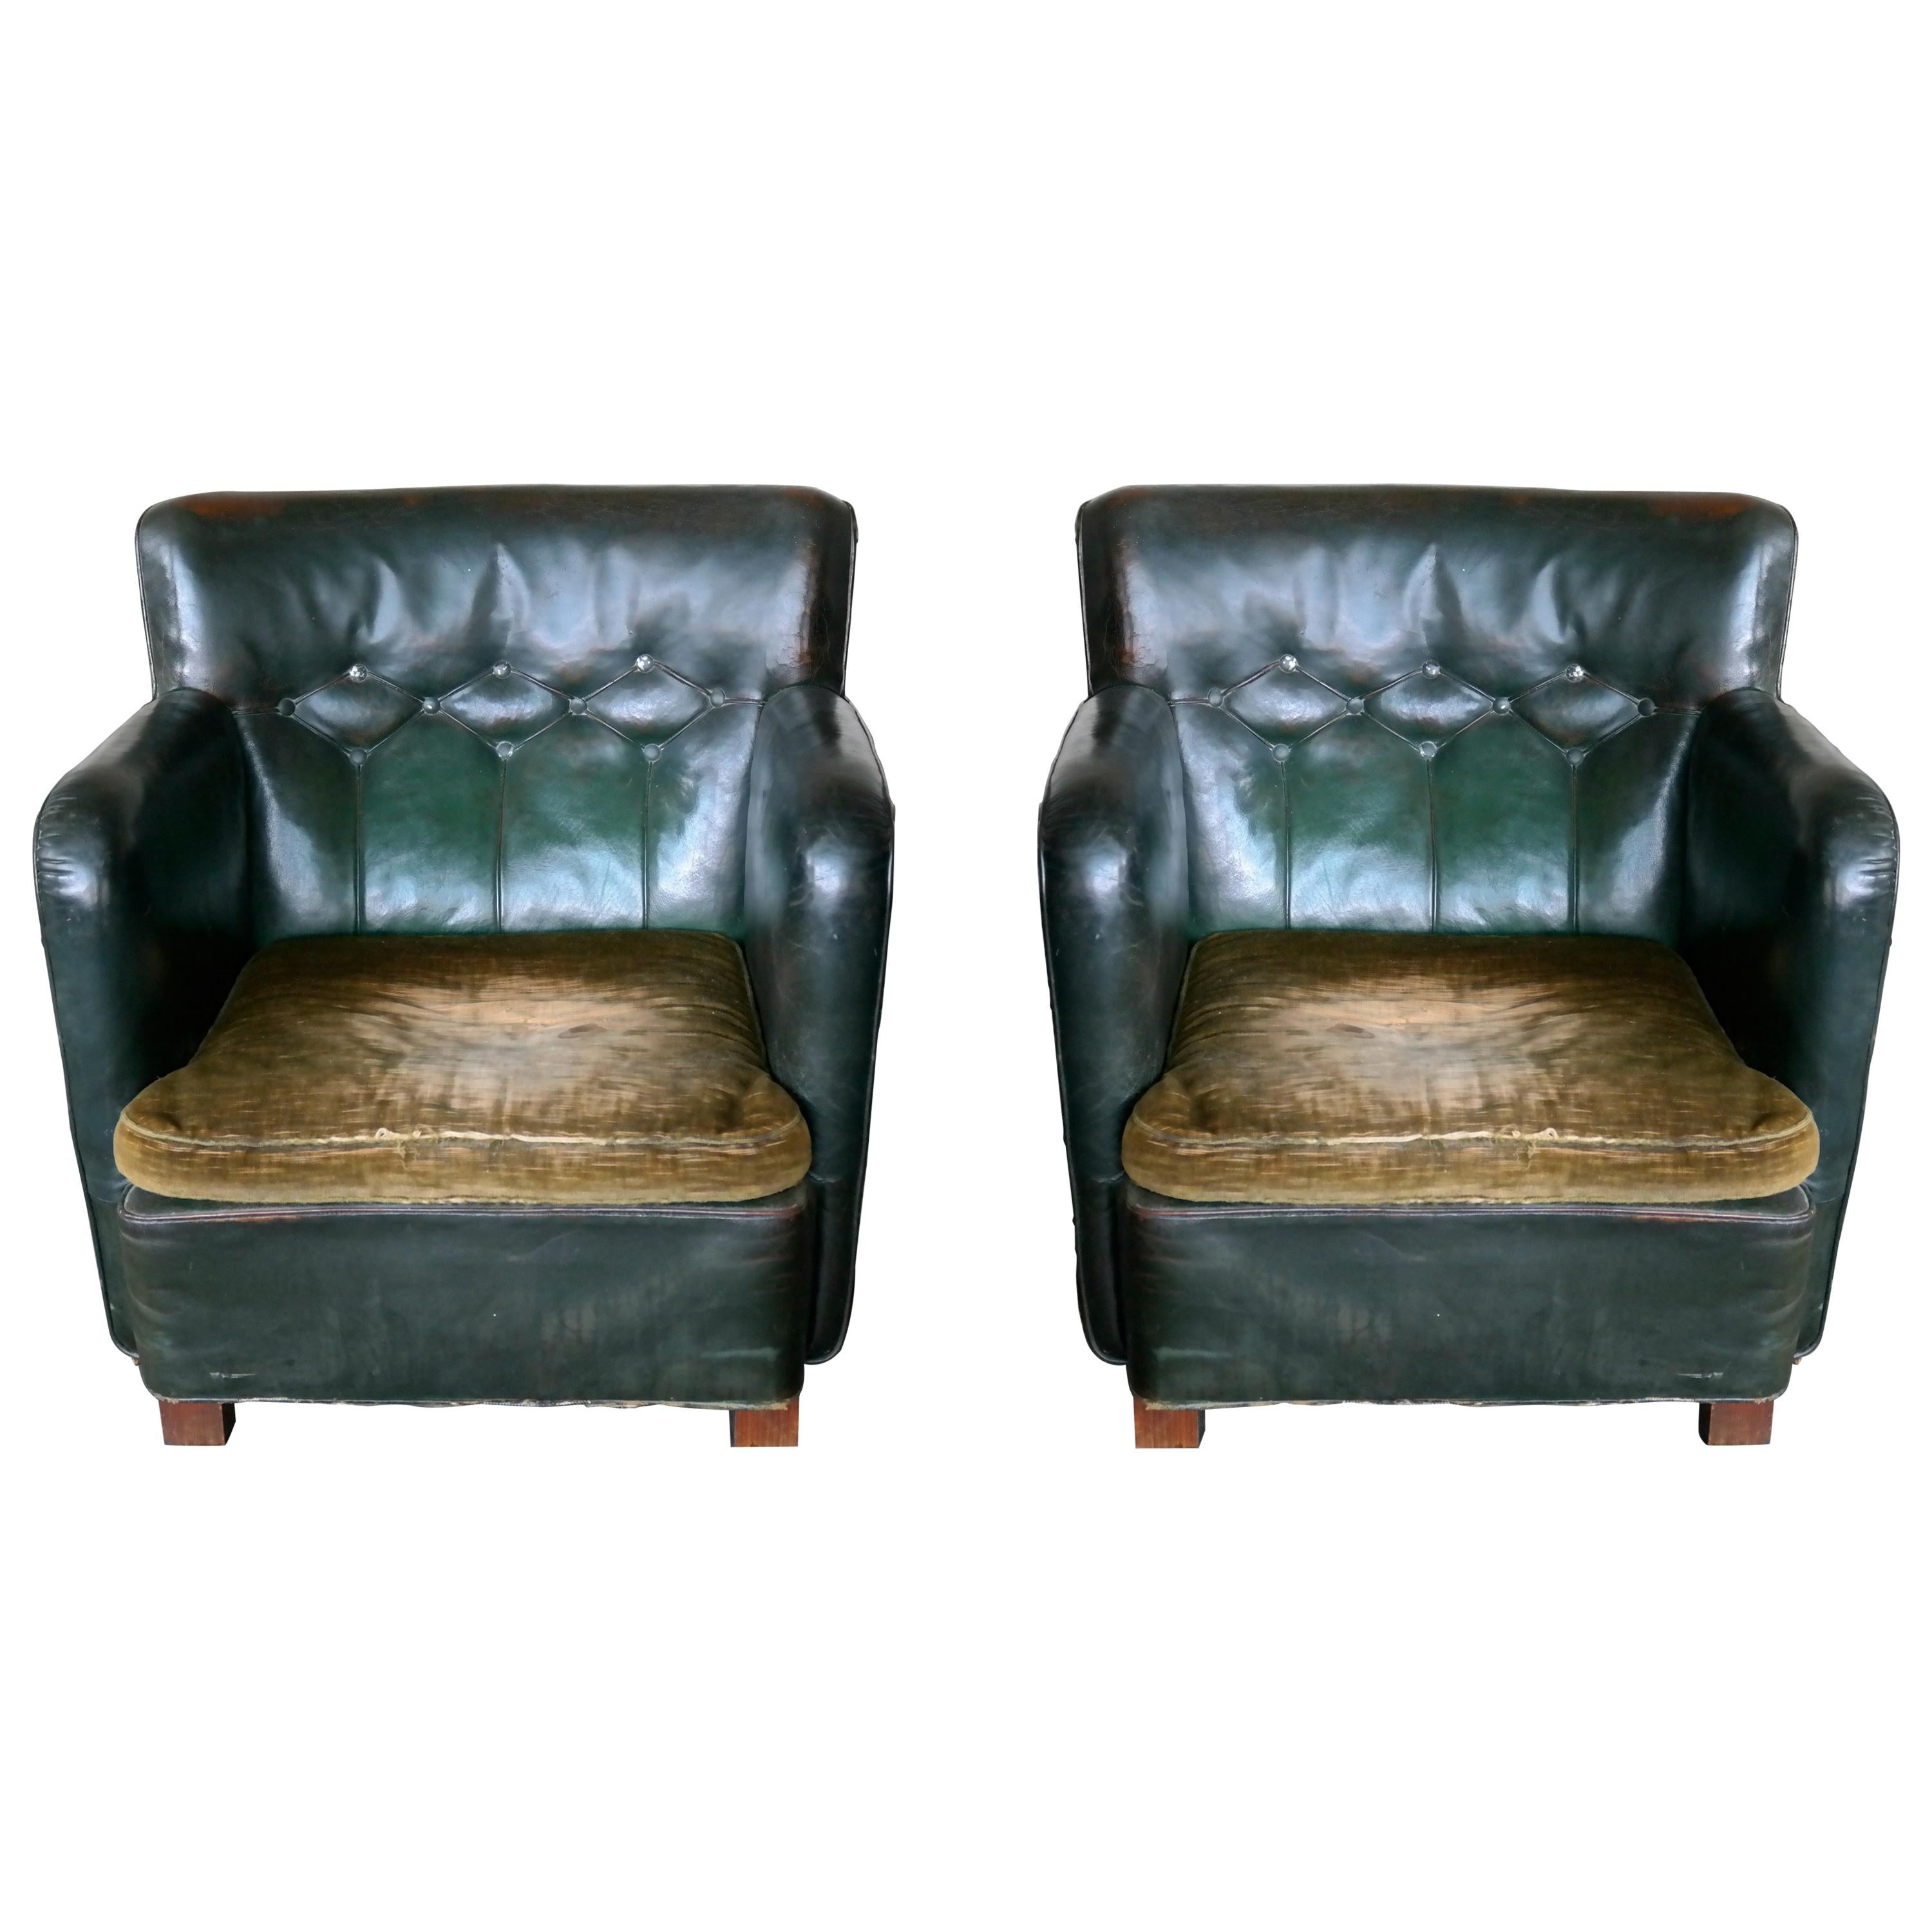 Fantastic pair of Danish club armchairs made by unknown manufacturer around the mid 1930's. Tufted backs with metal buttons in original amazing racing green colored leather with brass tacks on the sides. Original patina and with areas of the backs,